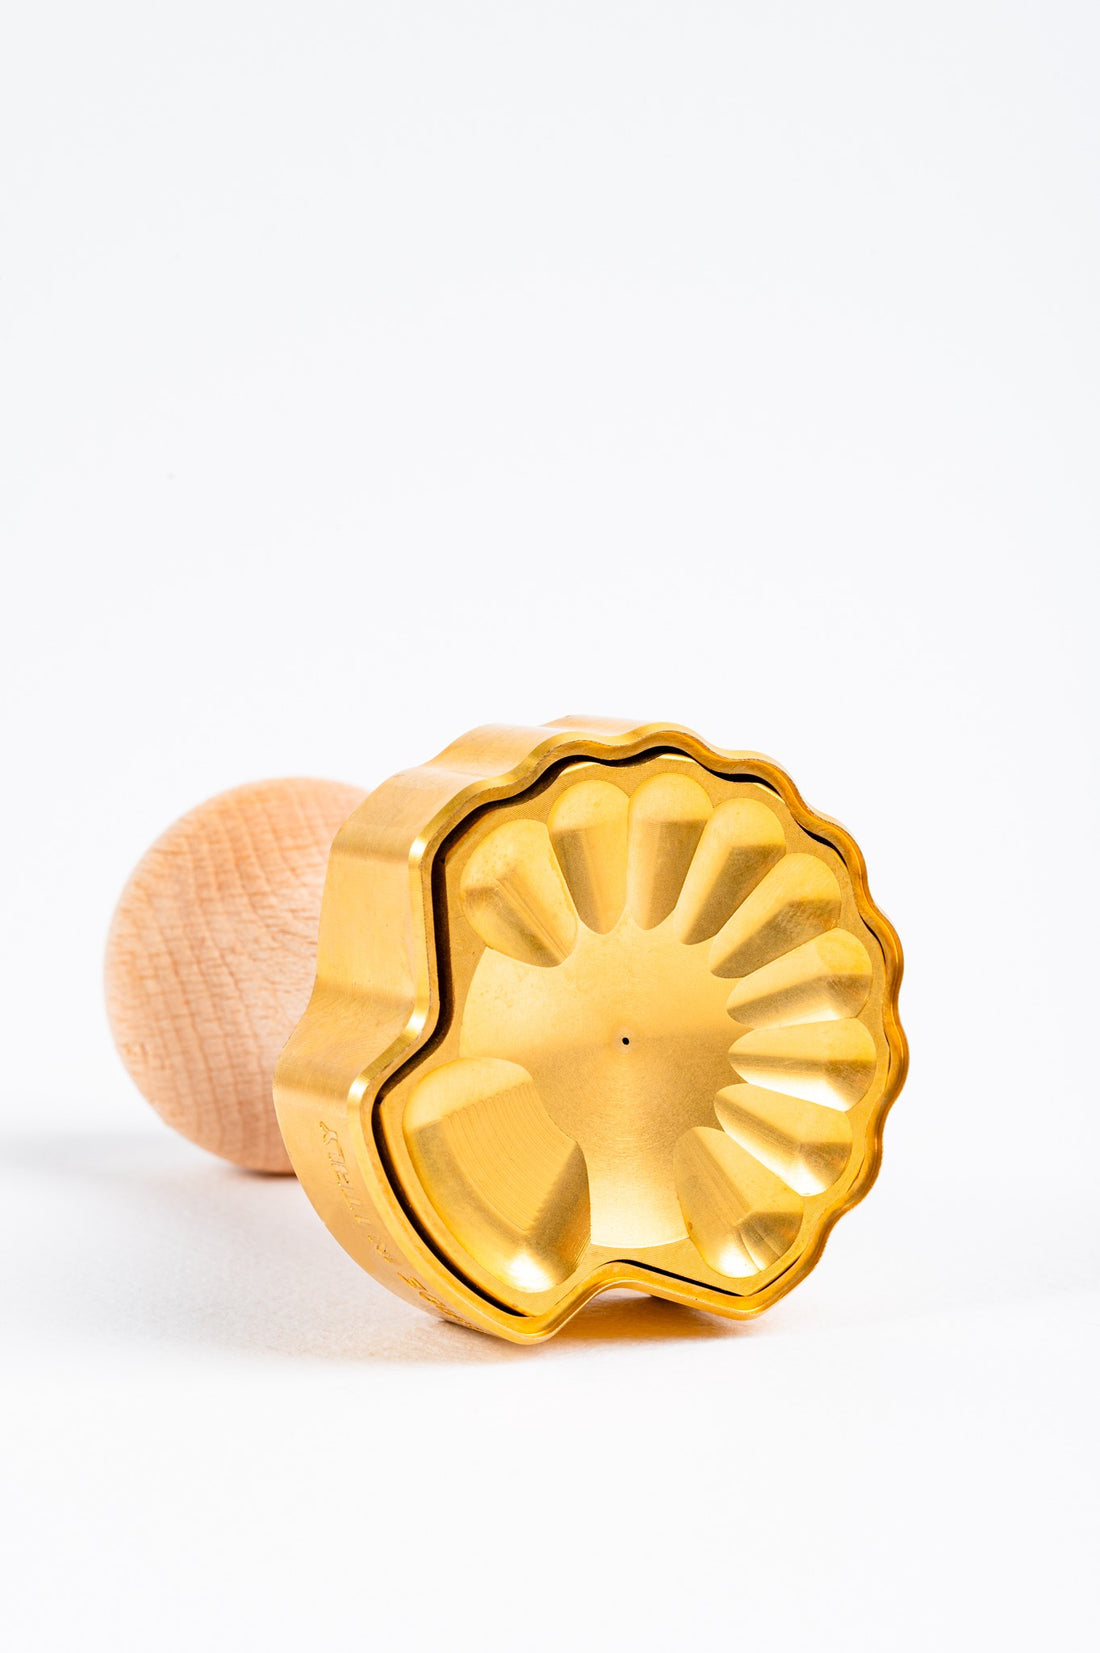 Professional Ravioli and Pasta SHELL Stamp in Brass and Natural Wood - ELENA